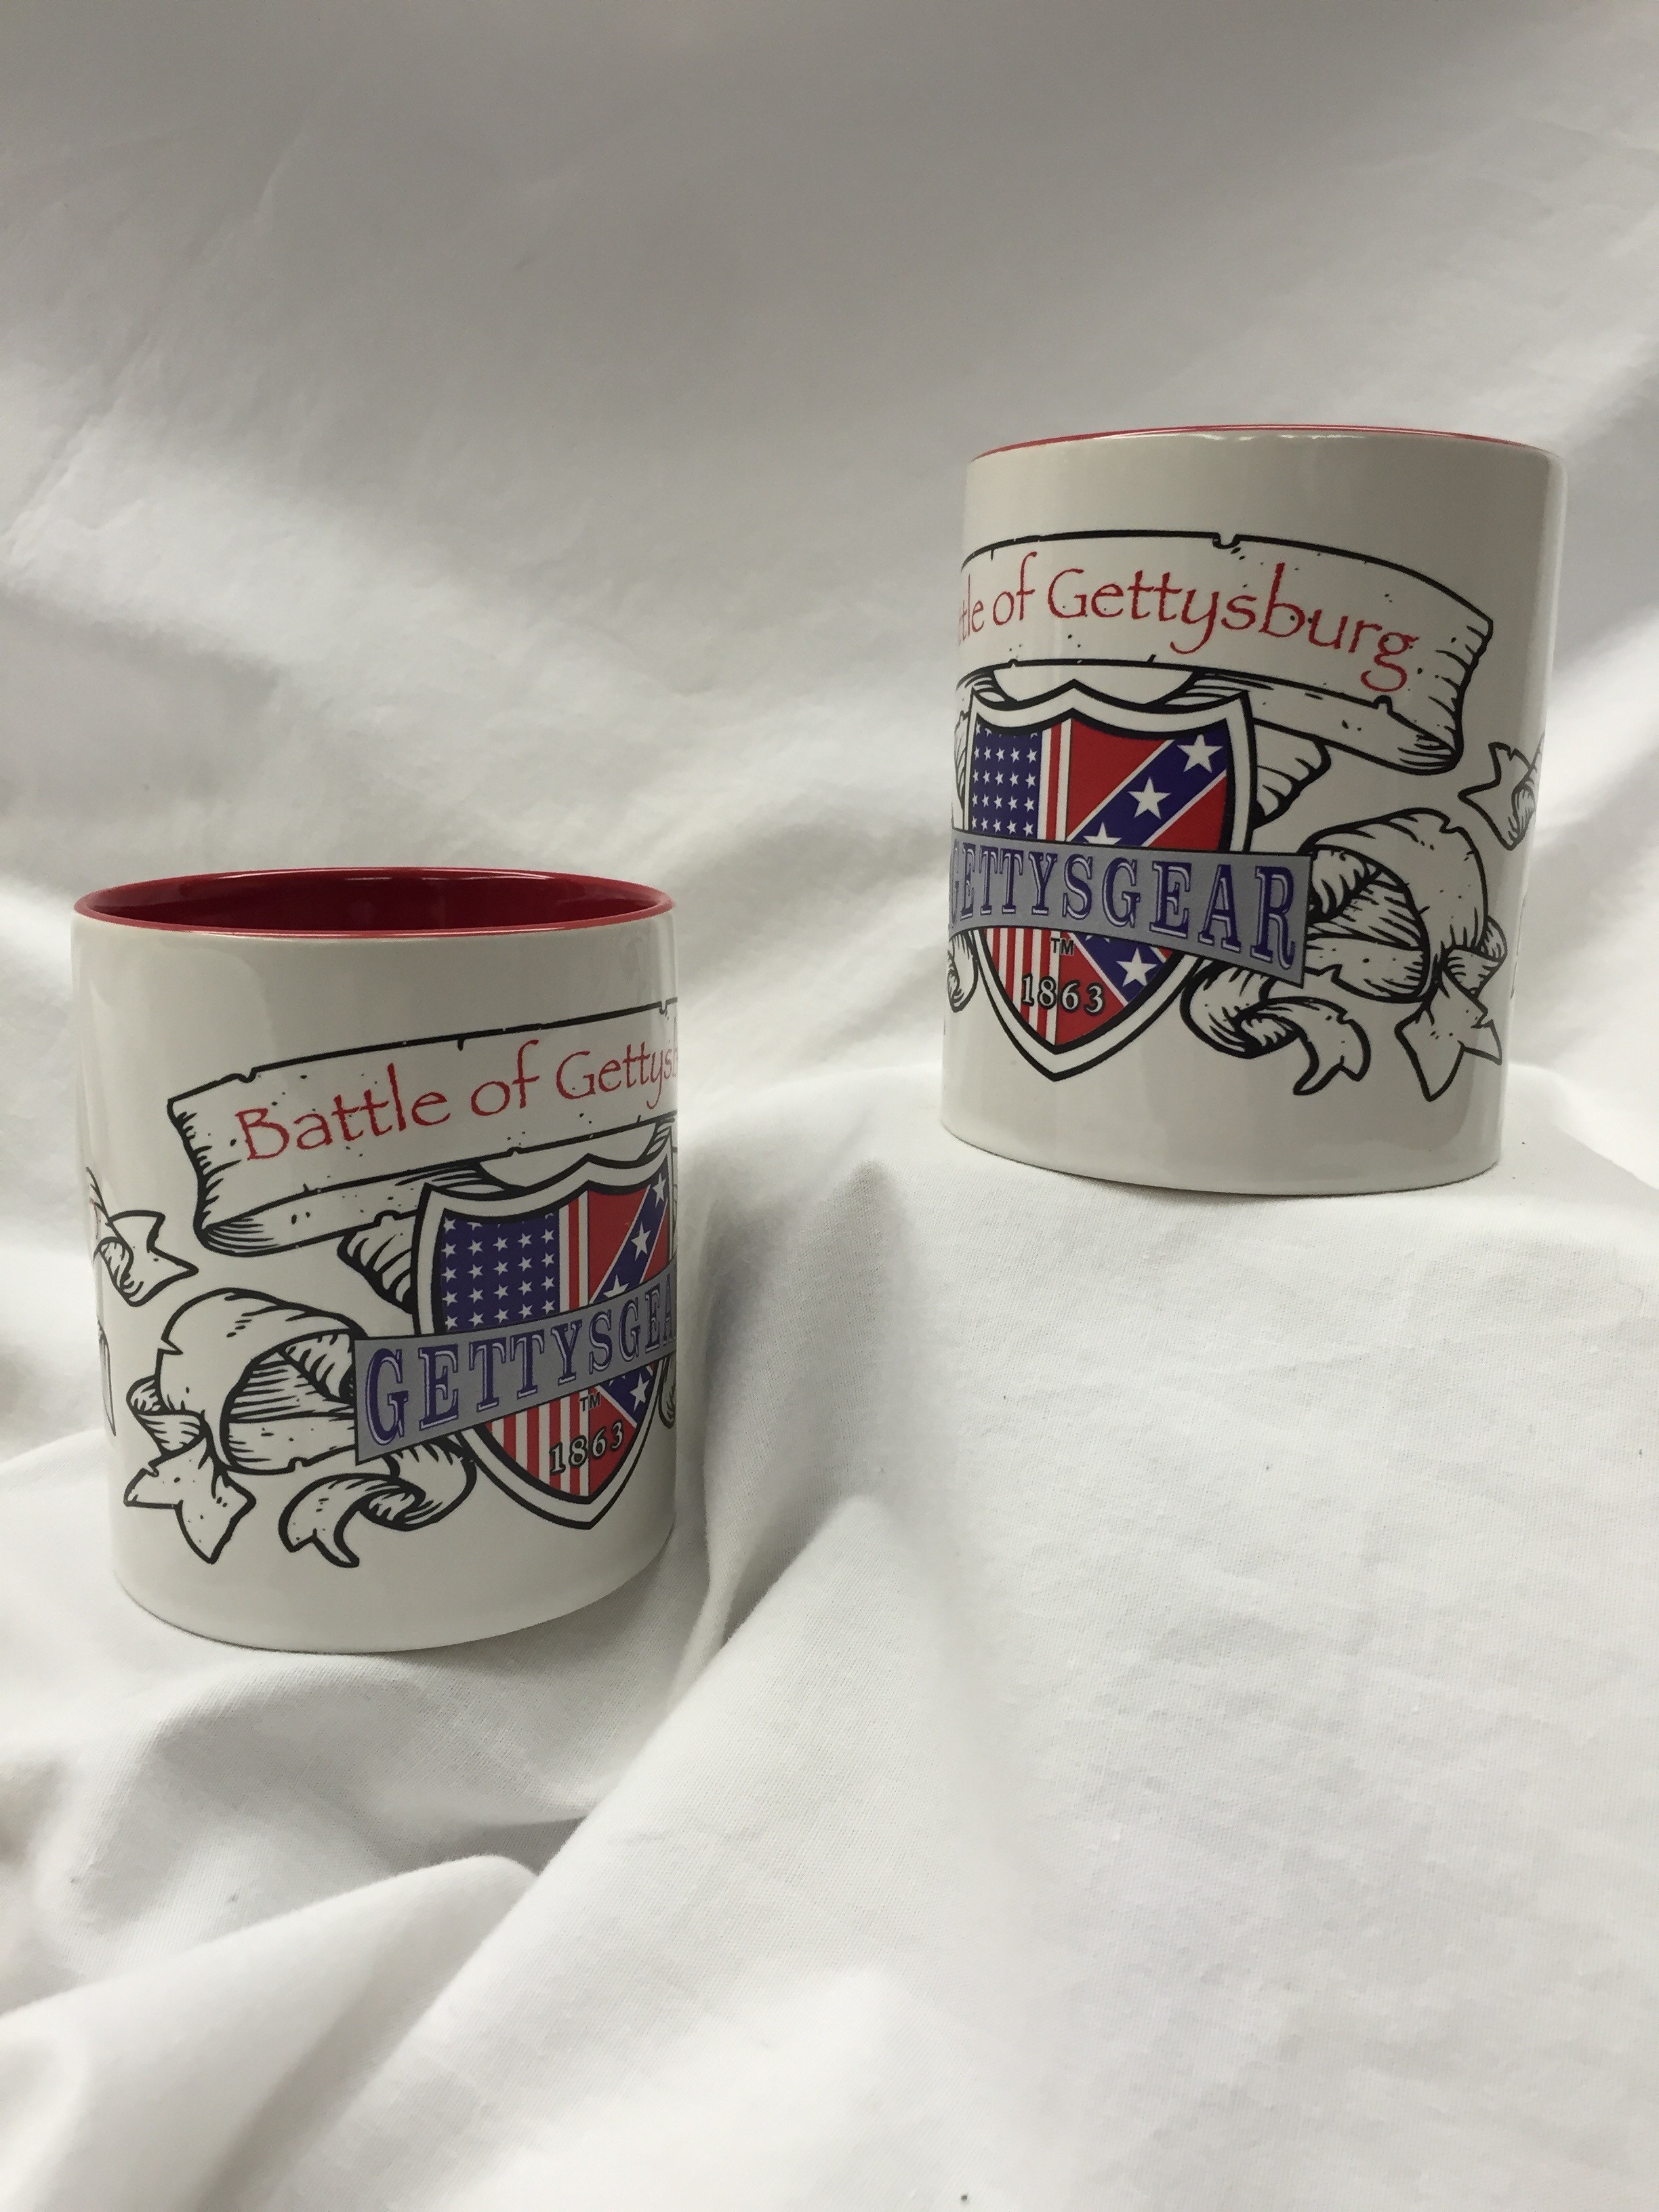 GettysGear mugs go perfectly with the Gettysburg rich coffee blends.